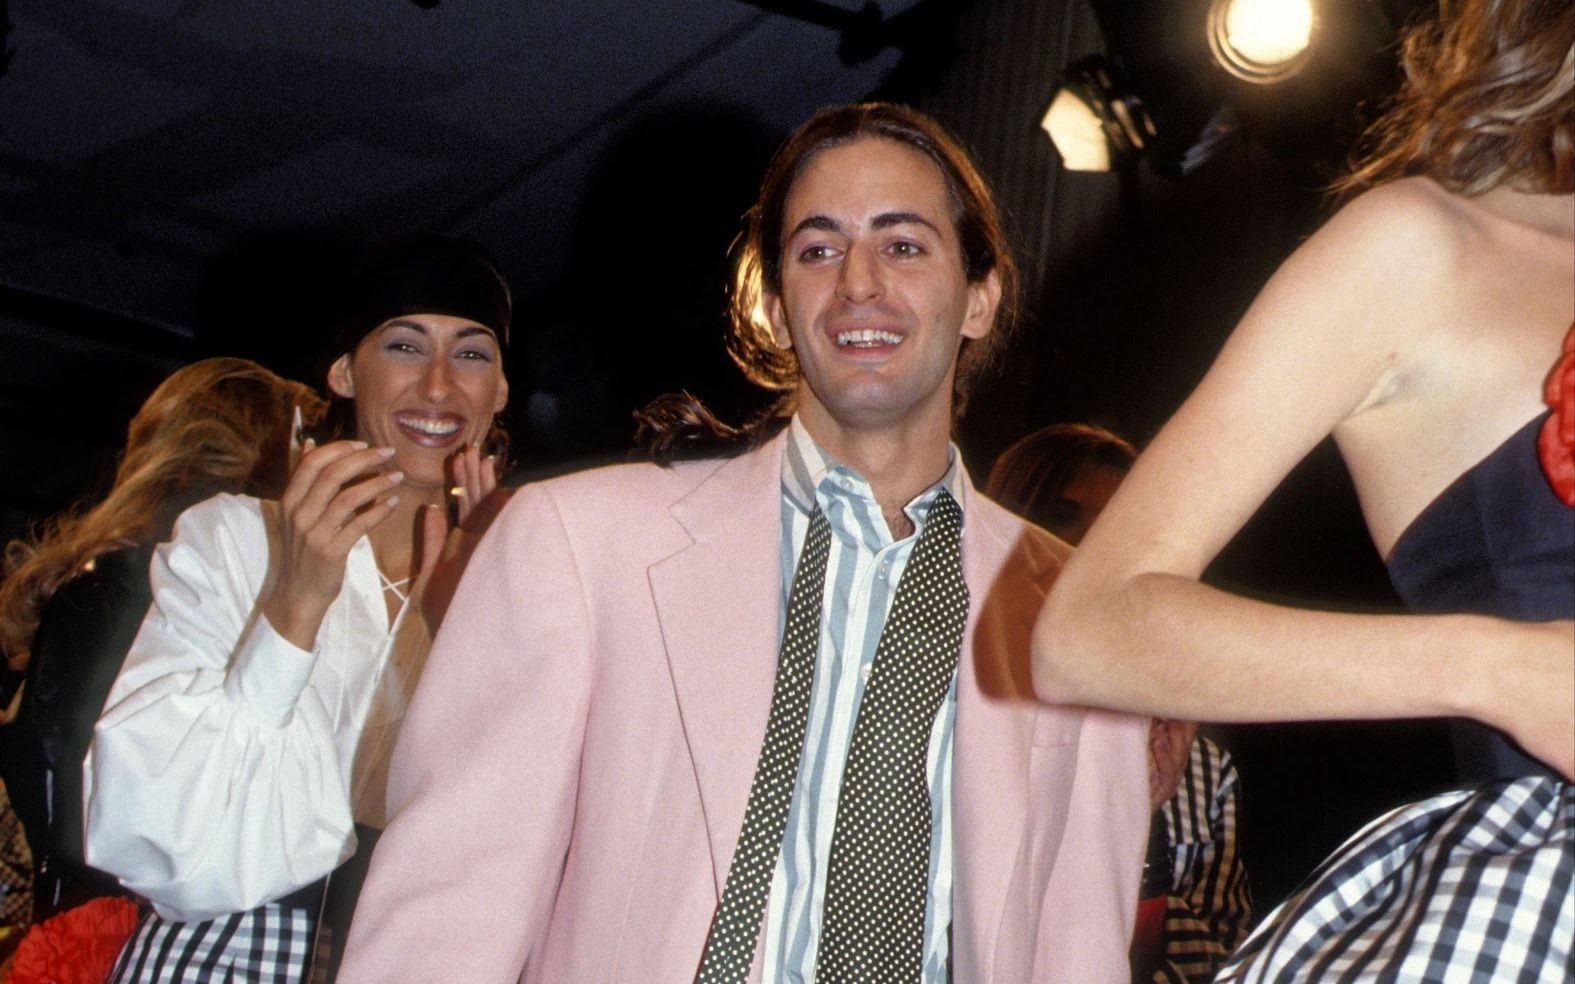 Reeling Back The Years - History Behind The Marc Jacobs Brand 